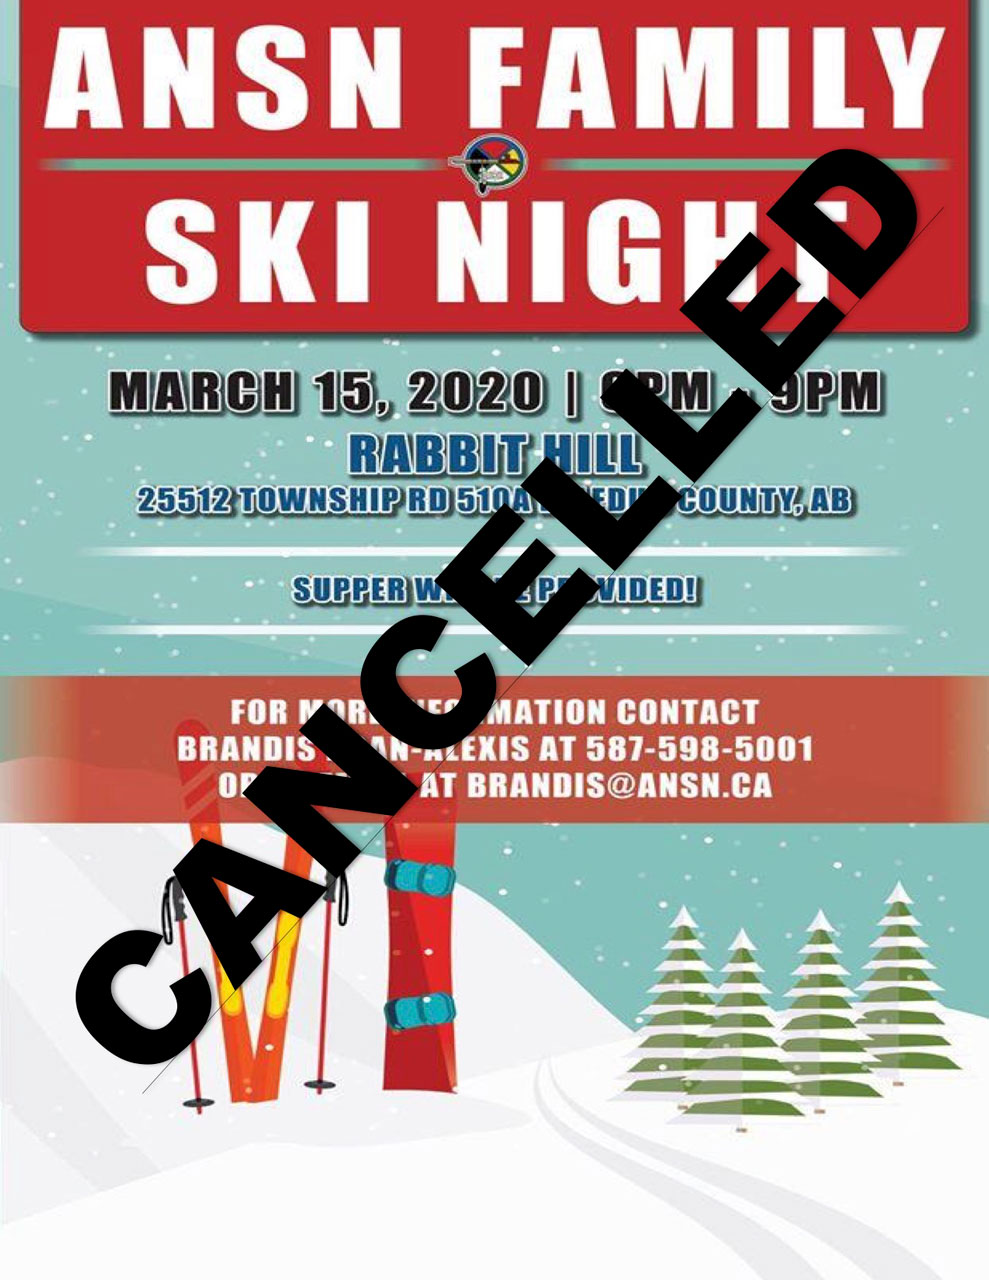 ANSN Family Ski Night is Cancelled